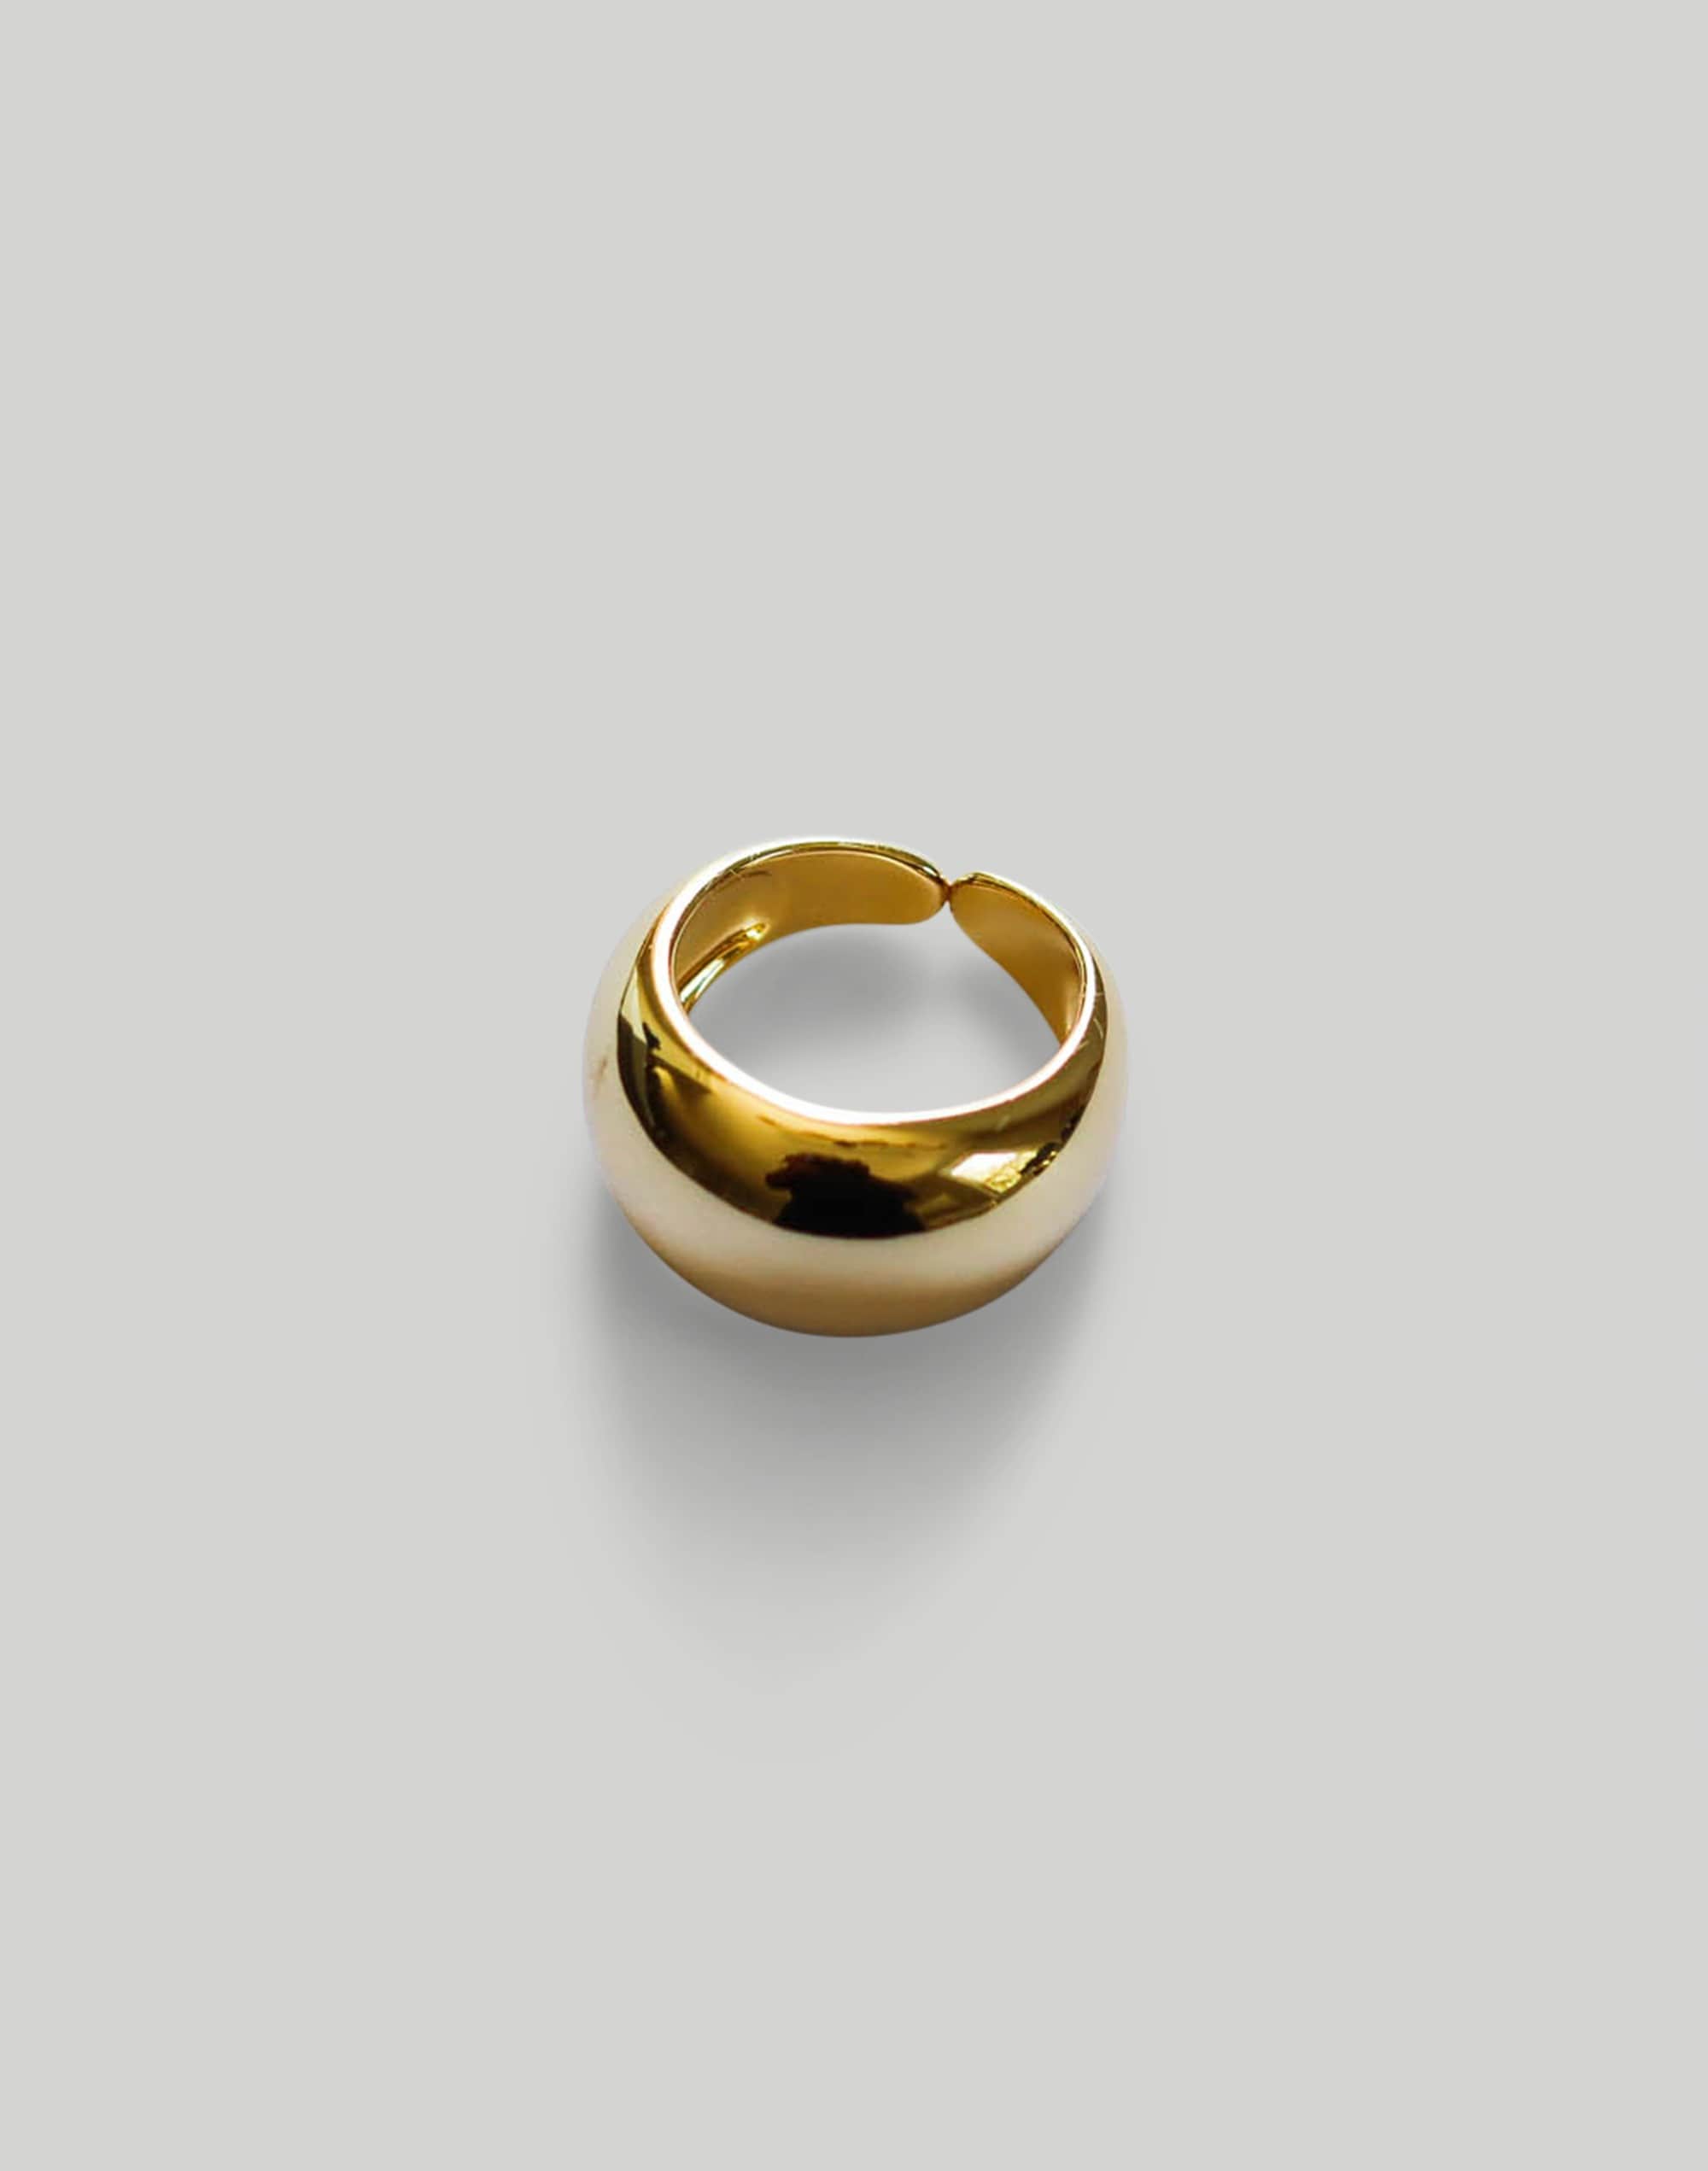 Abcrete & Co. The Adjustable Bold Dome Ring